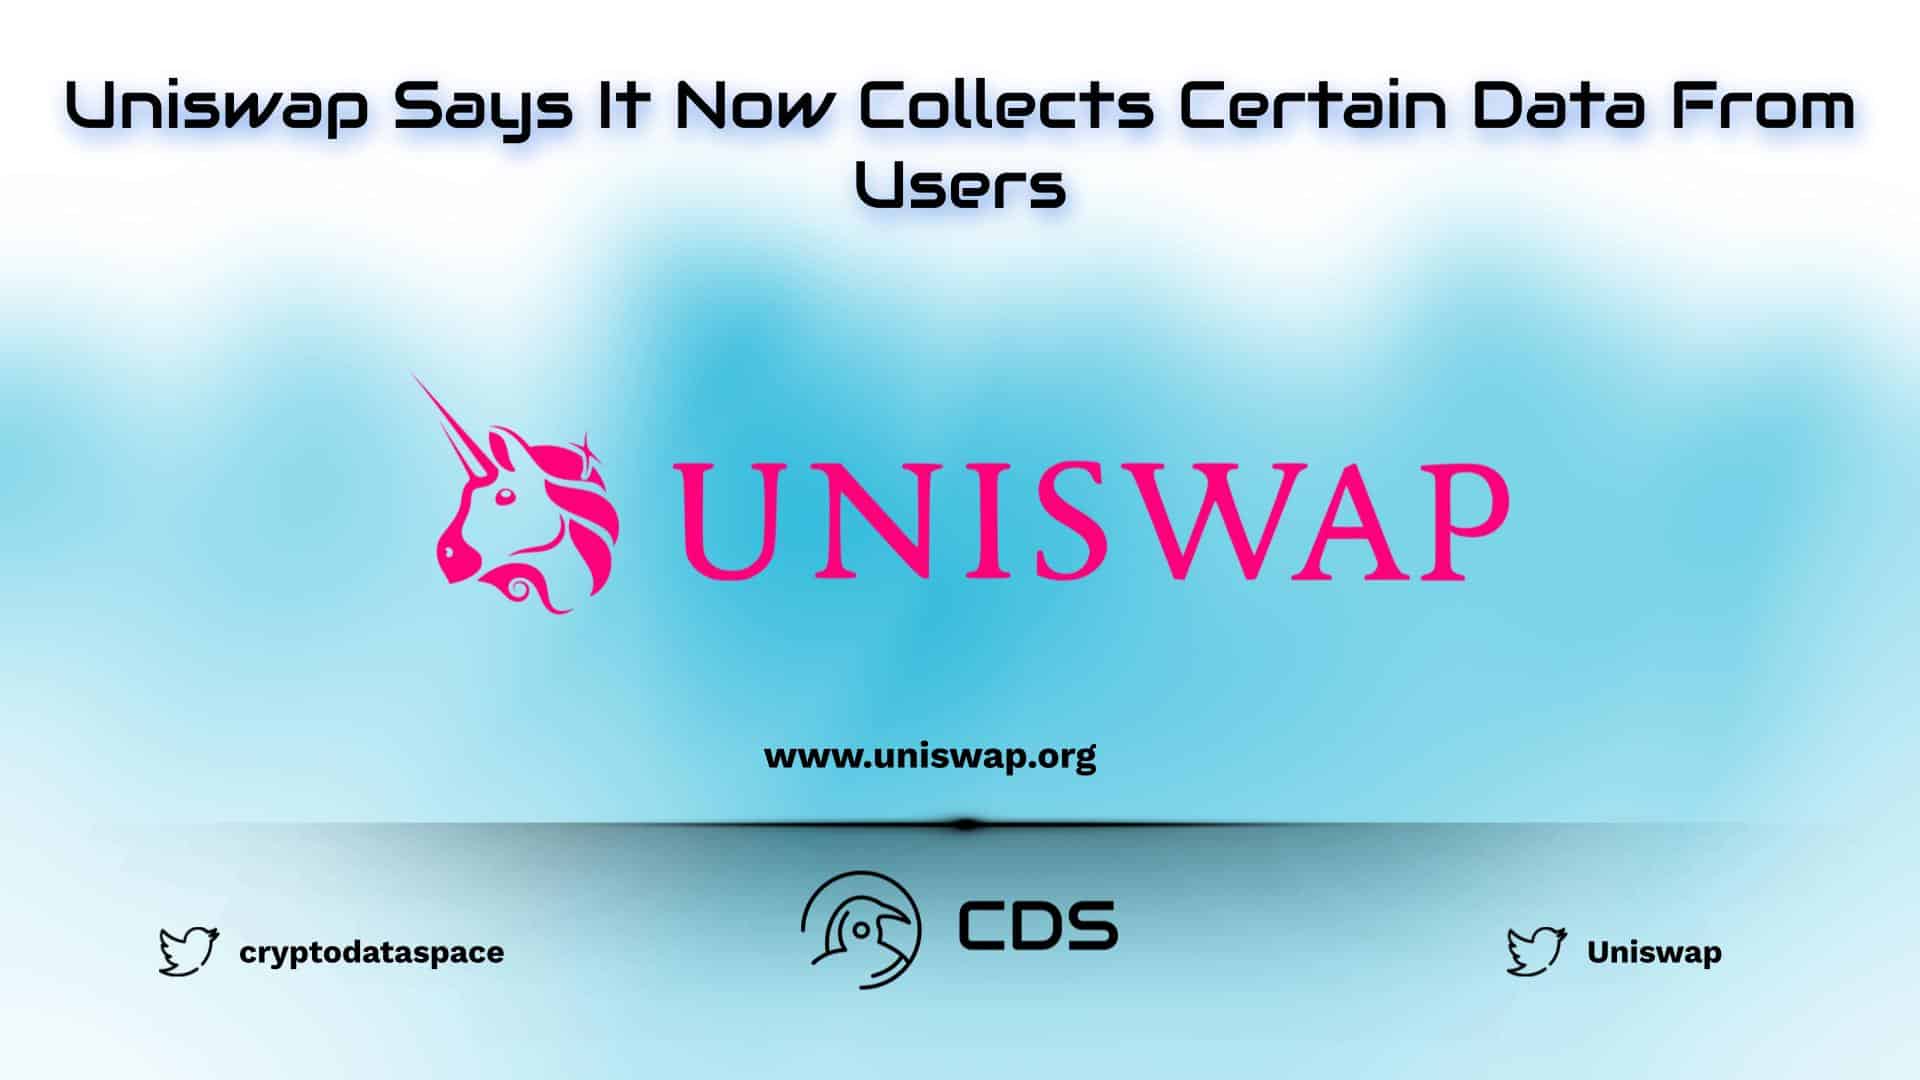 Uniswap Says It Now Collects Certain Data From Users